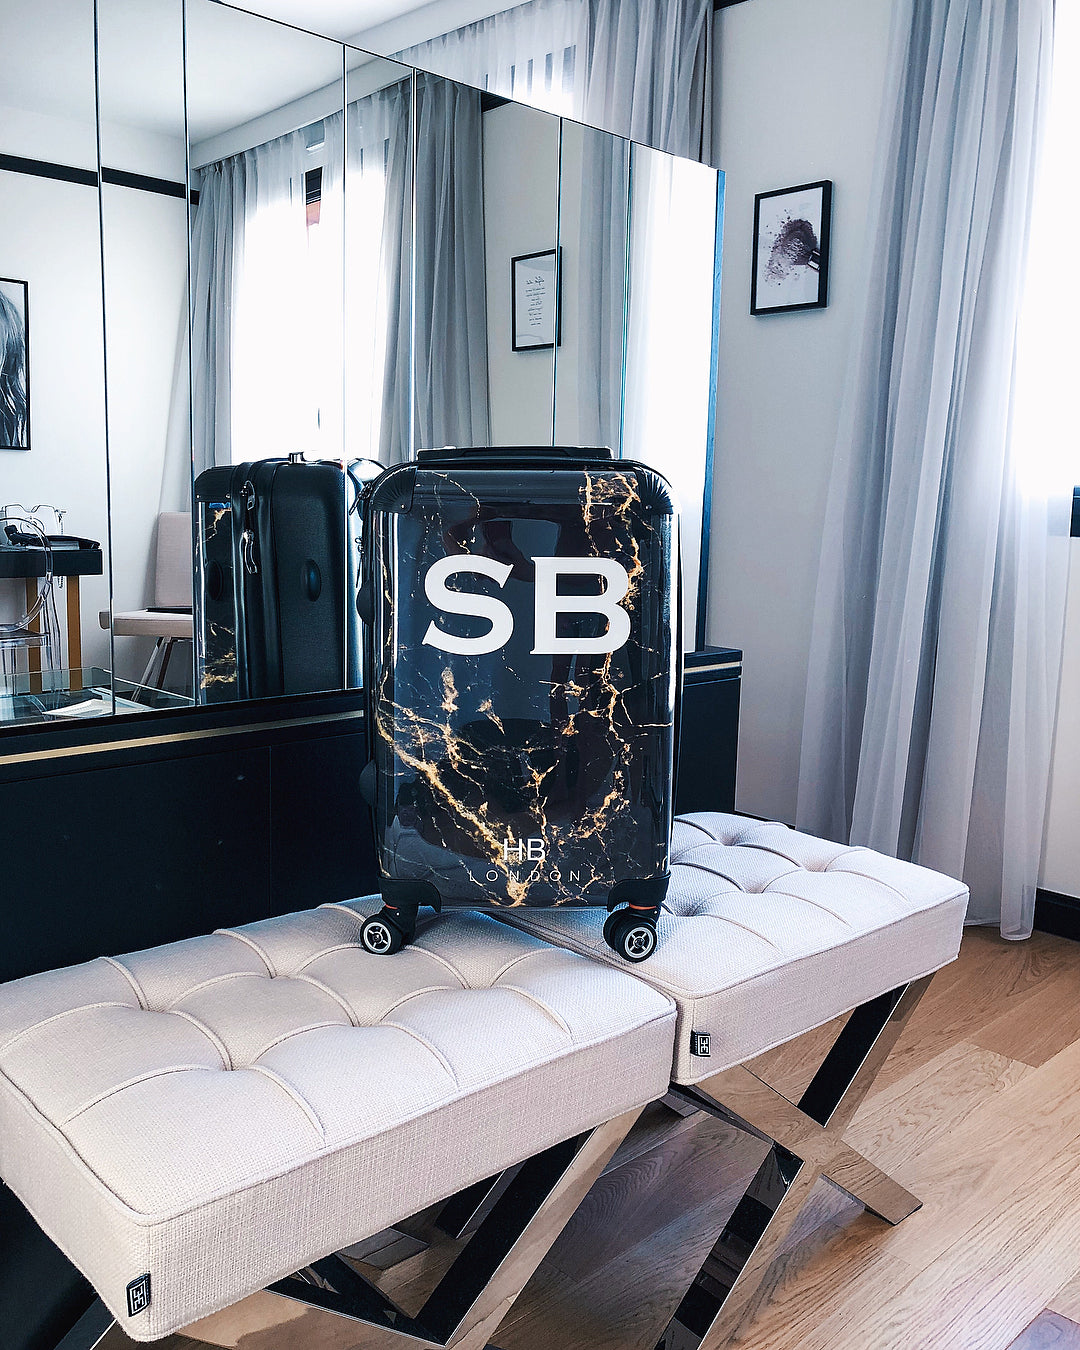 Personalised Black and Gold Marble Initial Suitcase - HB LONDON